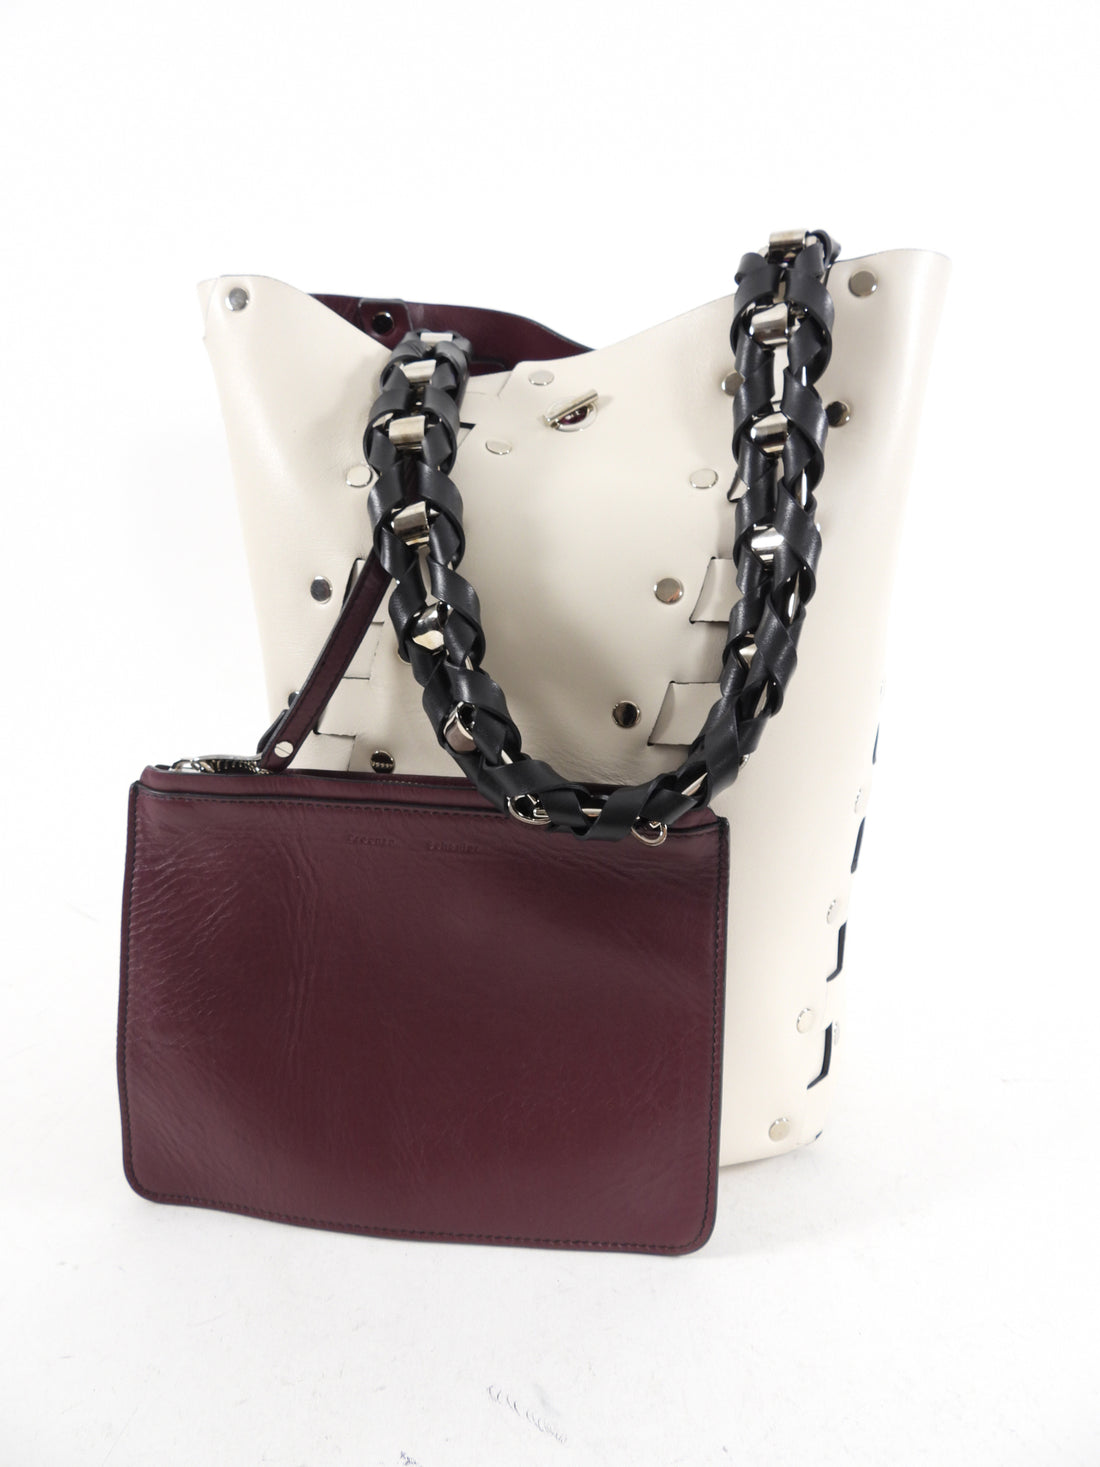 Proenza Schouler White Leather Stud Hex Tote Bag